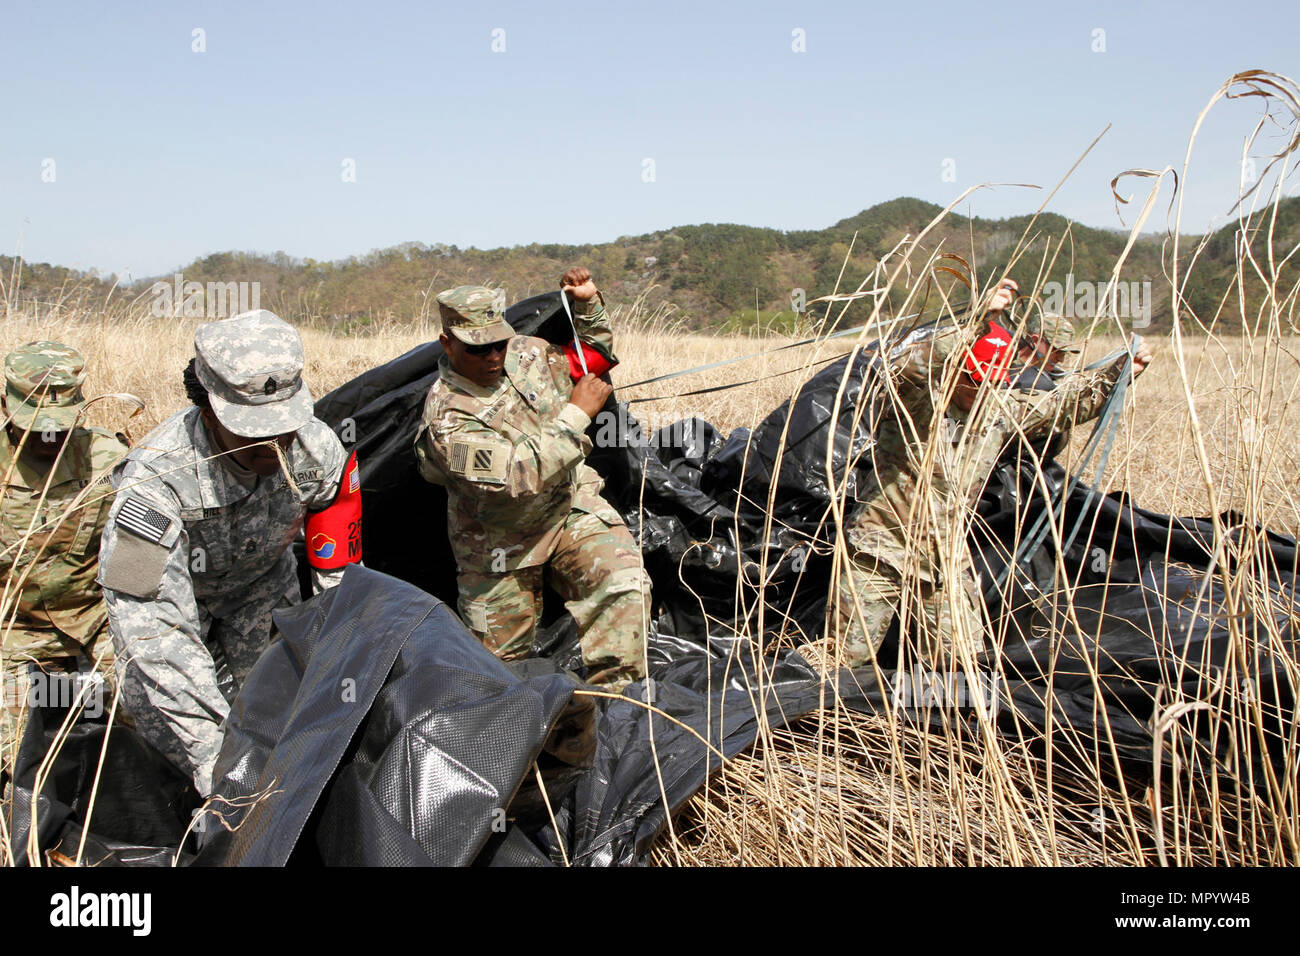 Soldiers from 25th Transportation Battalion work to recover the parachute from a low cost aerial delivery system, April 12, 2017, at a drop zone between Daegu and Busan, South Korea. Multiple U.S. assets and ROK Air Force validated their aerial logistics capabilities as part of ongoing exercise Operation Pacific Reach ’17. Stock Photo